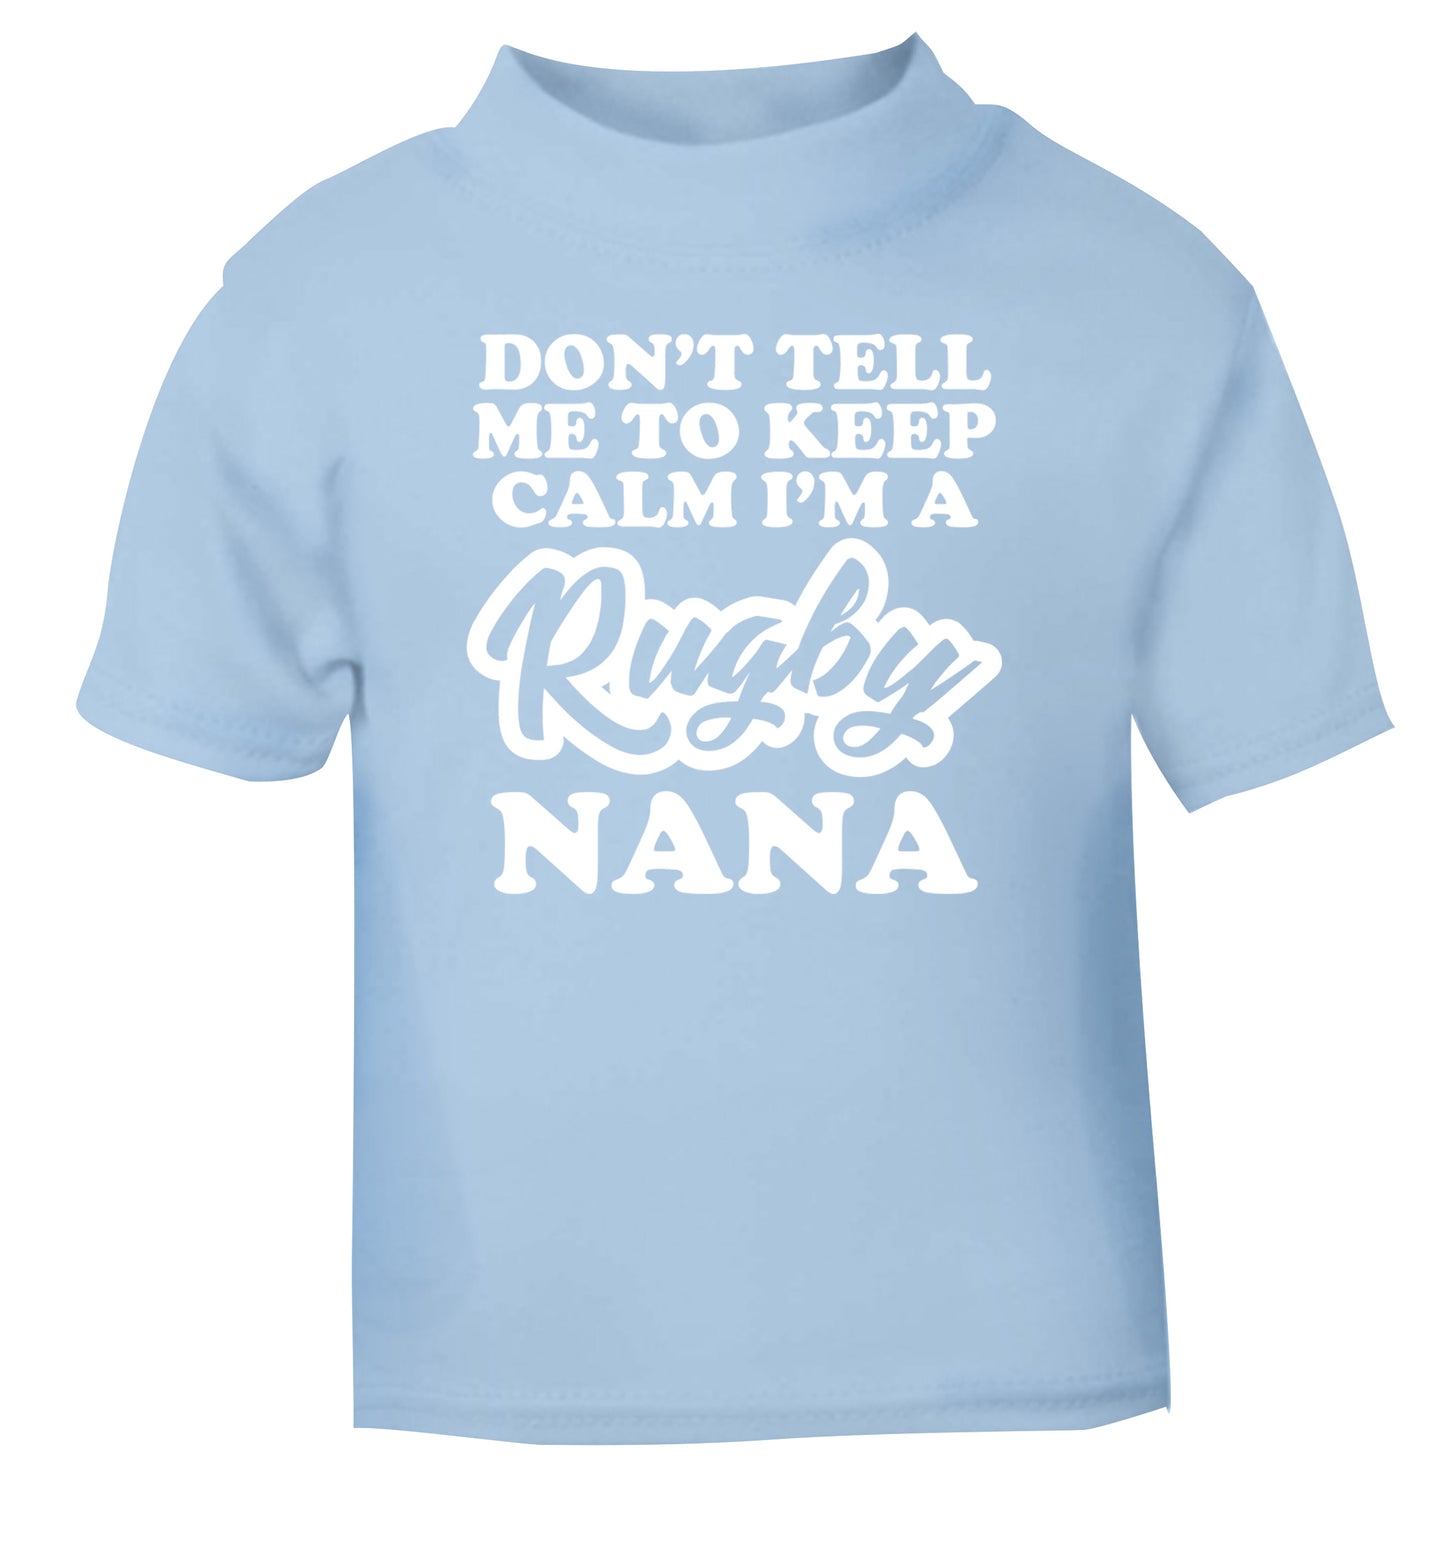 Don't tell me to keep calm I'm a rugby nana light blue Baby Toddler Tshirt 2 Years